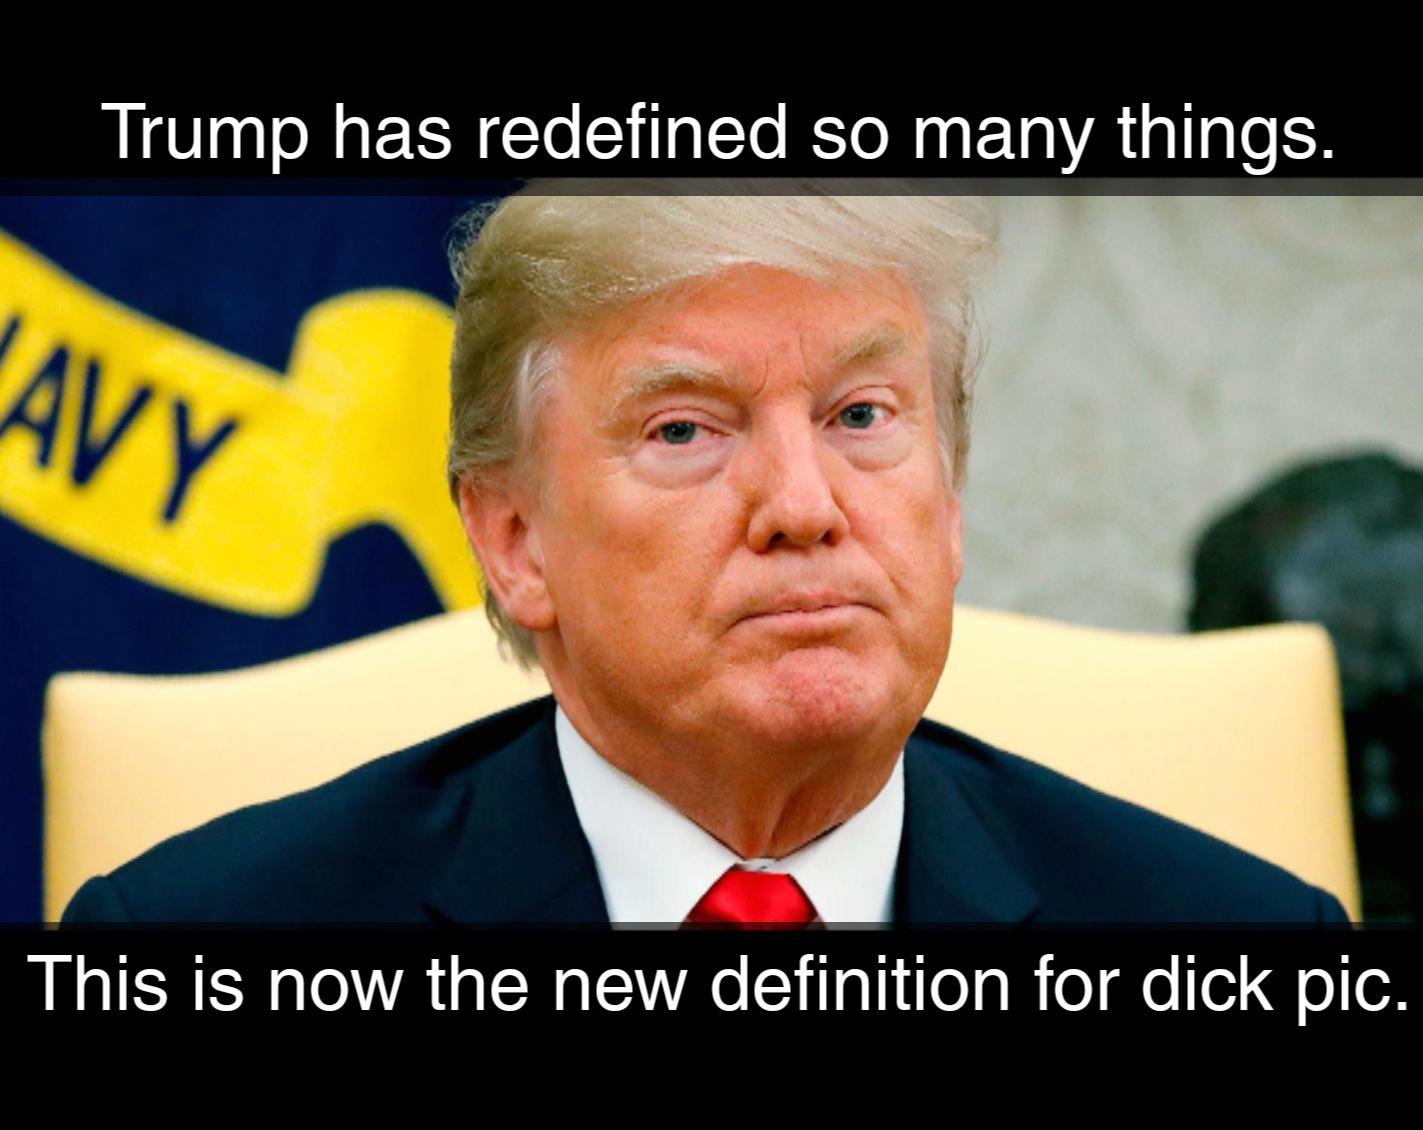 Trump has redefined so many things. This is now the new definition for dick pic.